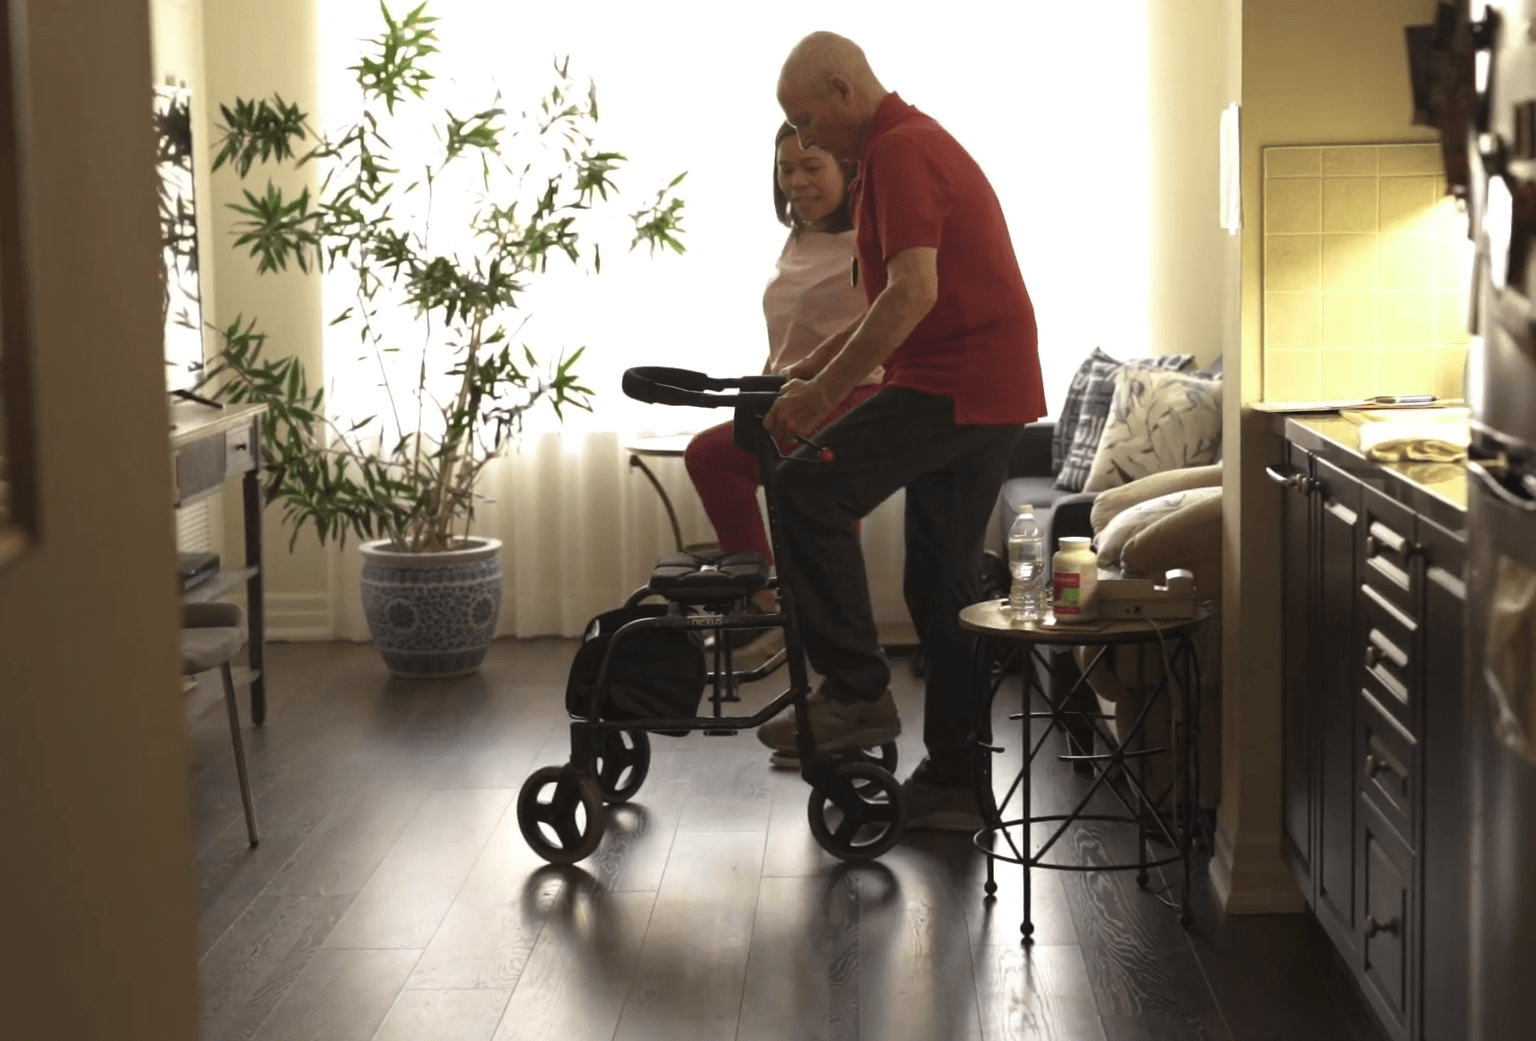 VHA Physiotherapy Assistant doing exercise with Rehab client